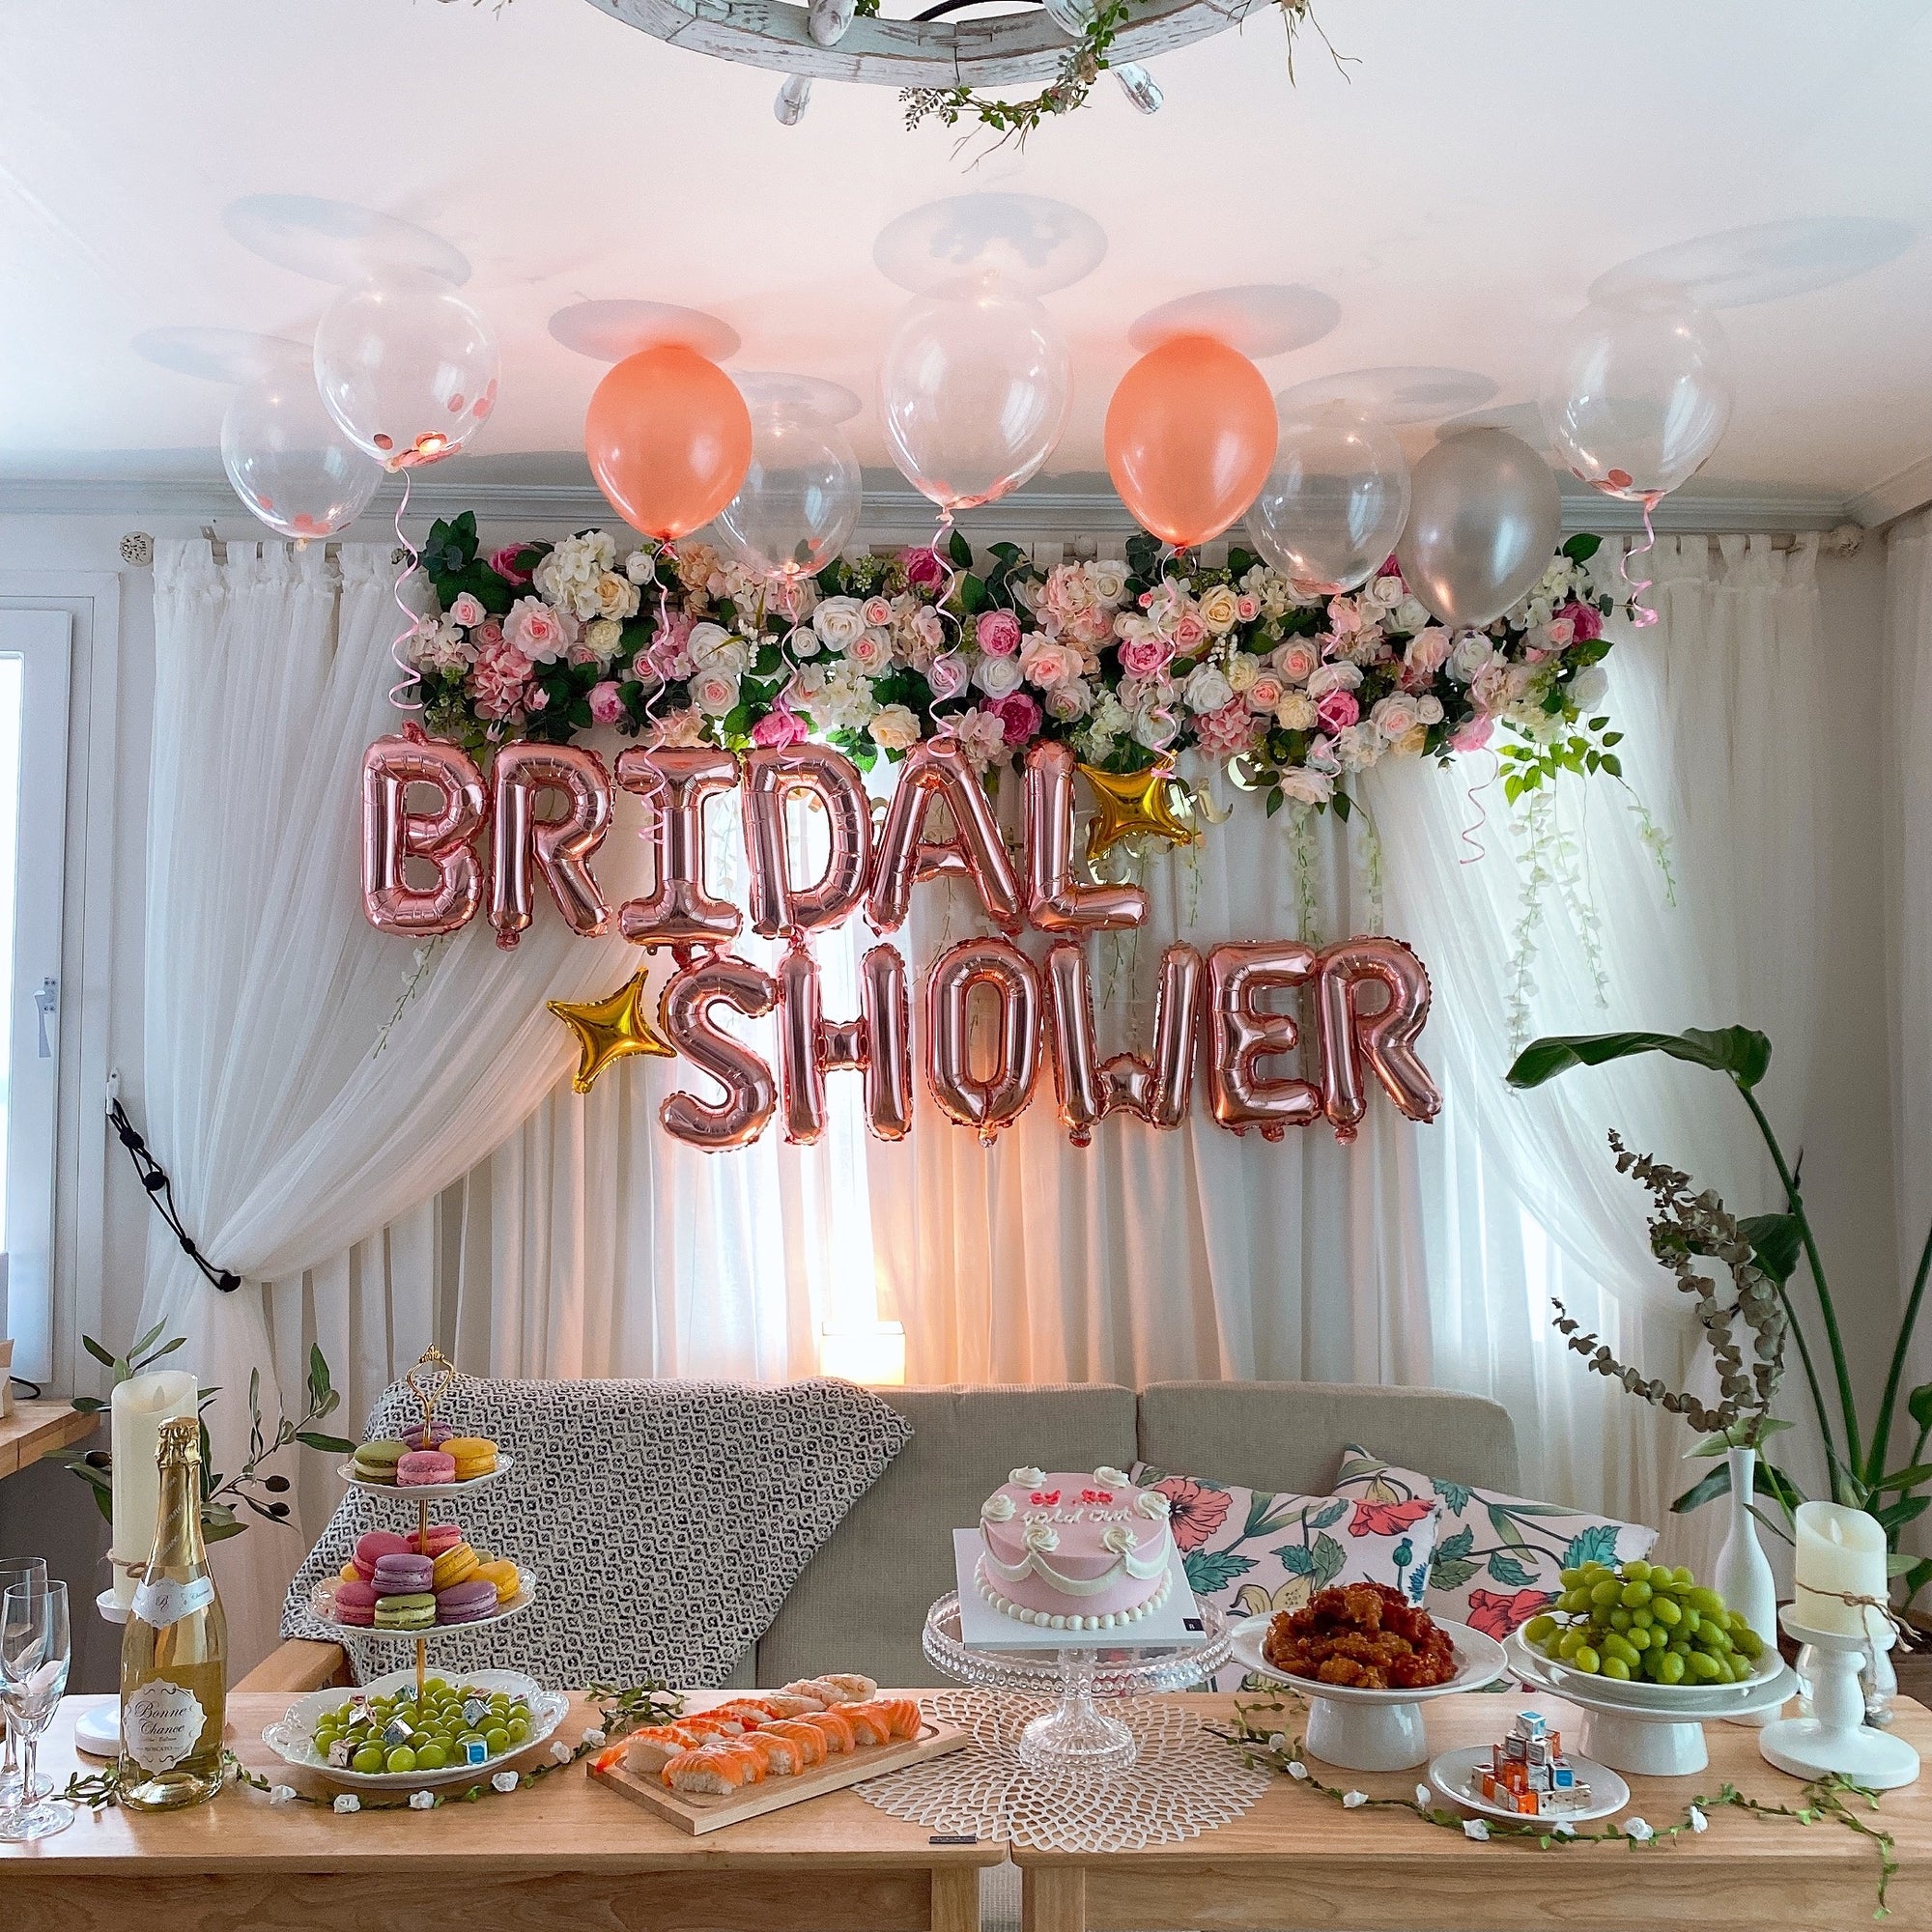 How to Plan the Perfect Bridal Shower: A Step-by-Step Guide